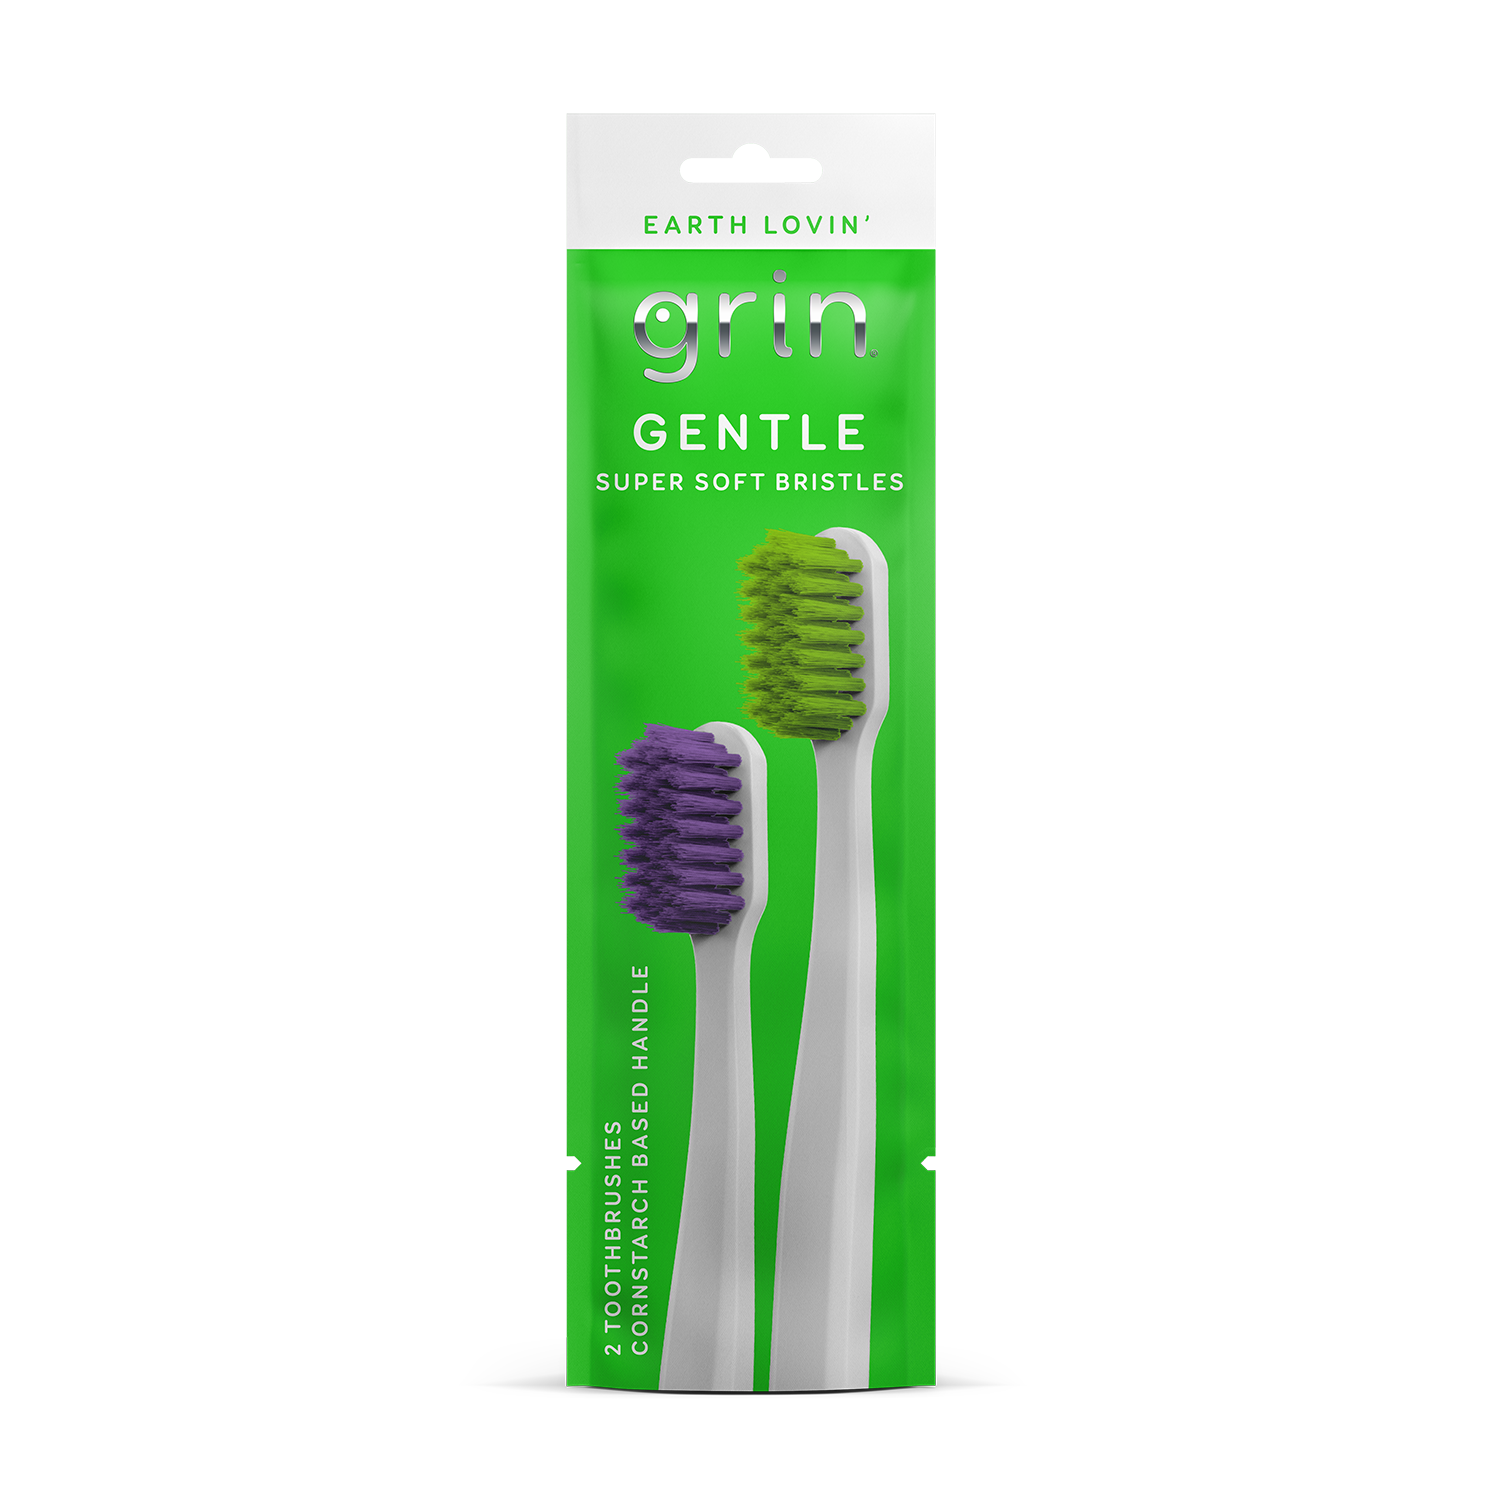 Grin Oral Care Gentle Toothbrushes (2)